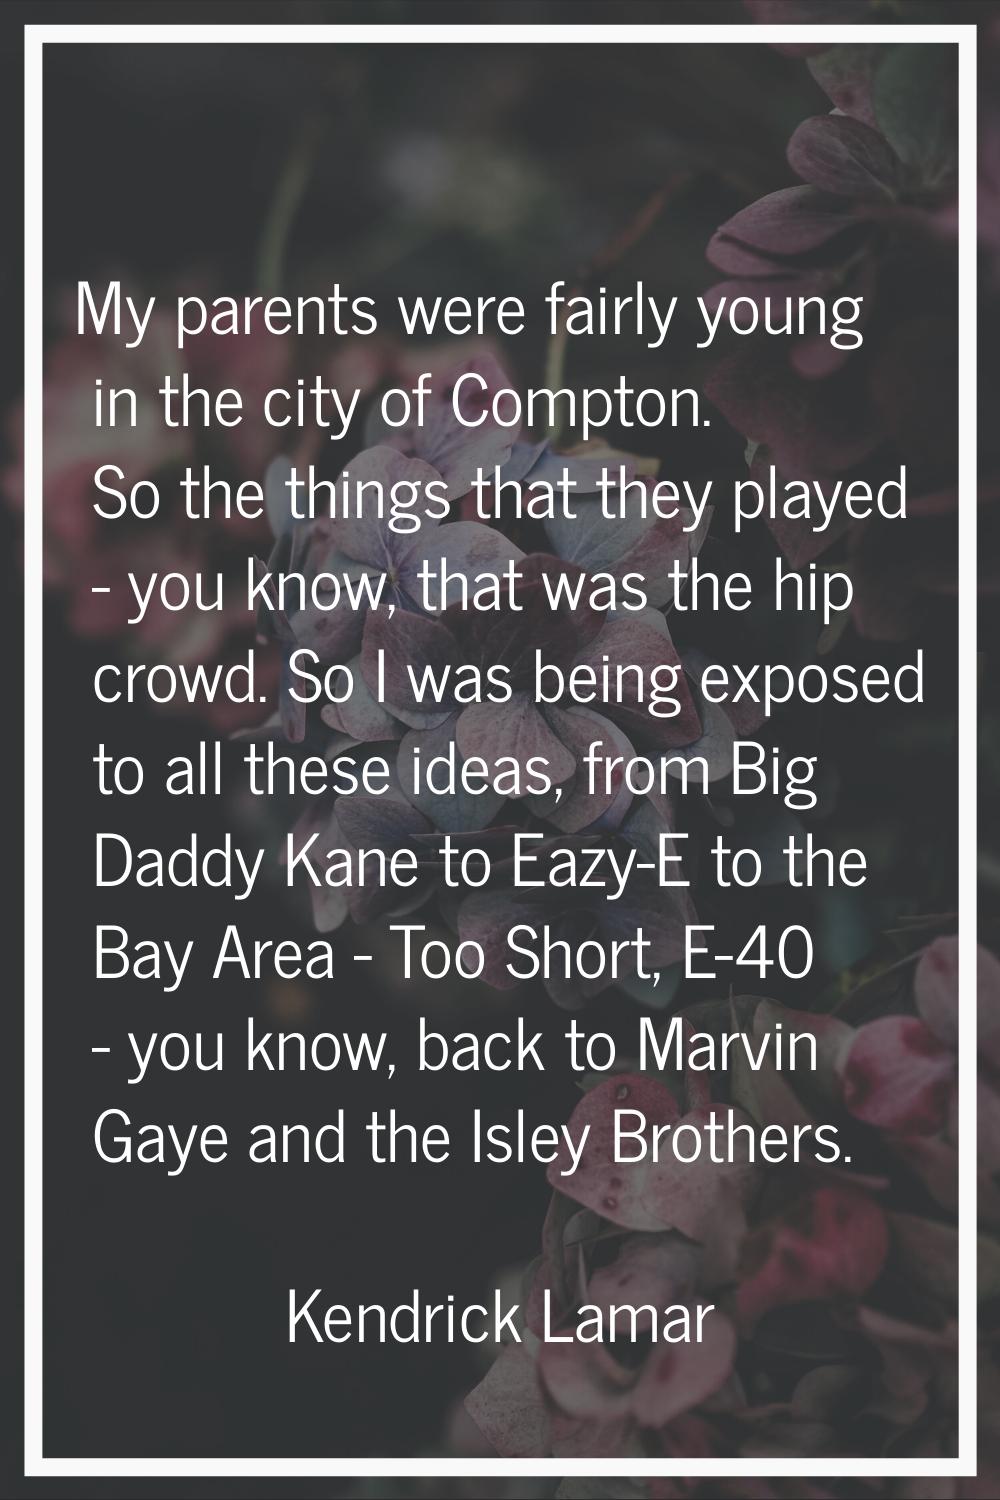 My parents were fairly young in the city of Compton. So the things that they played - you know, tha